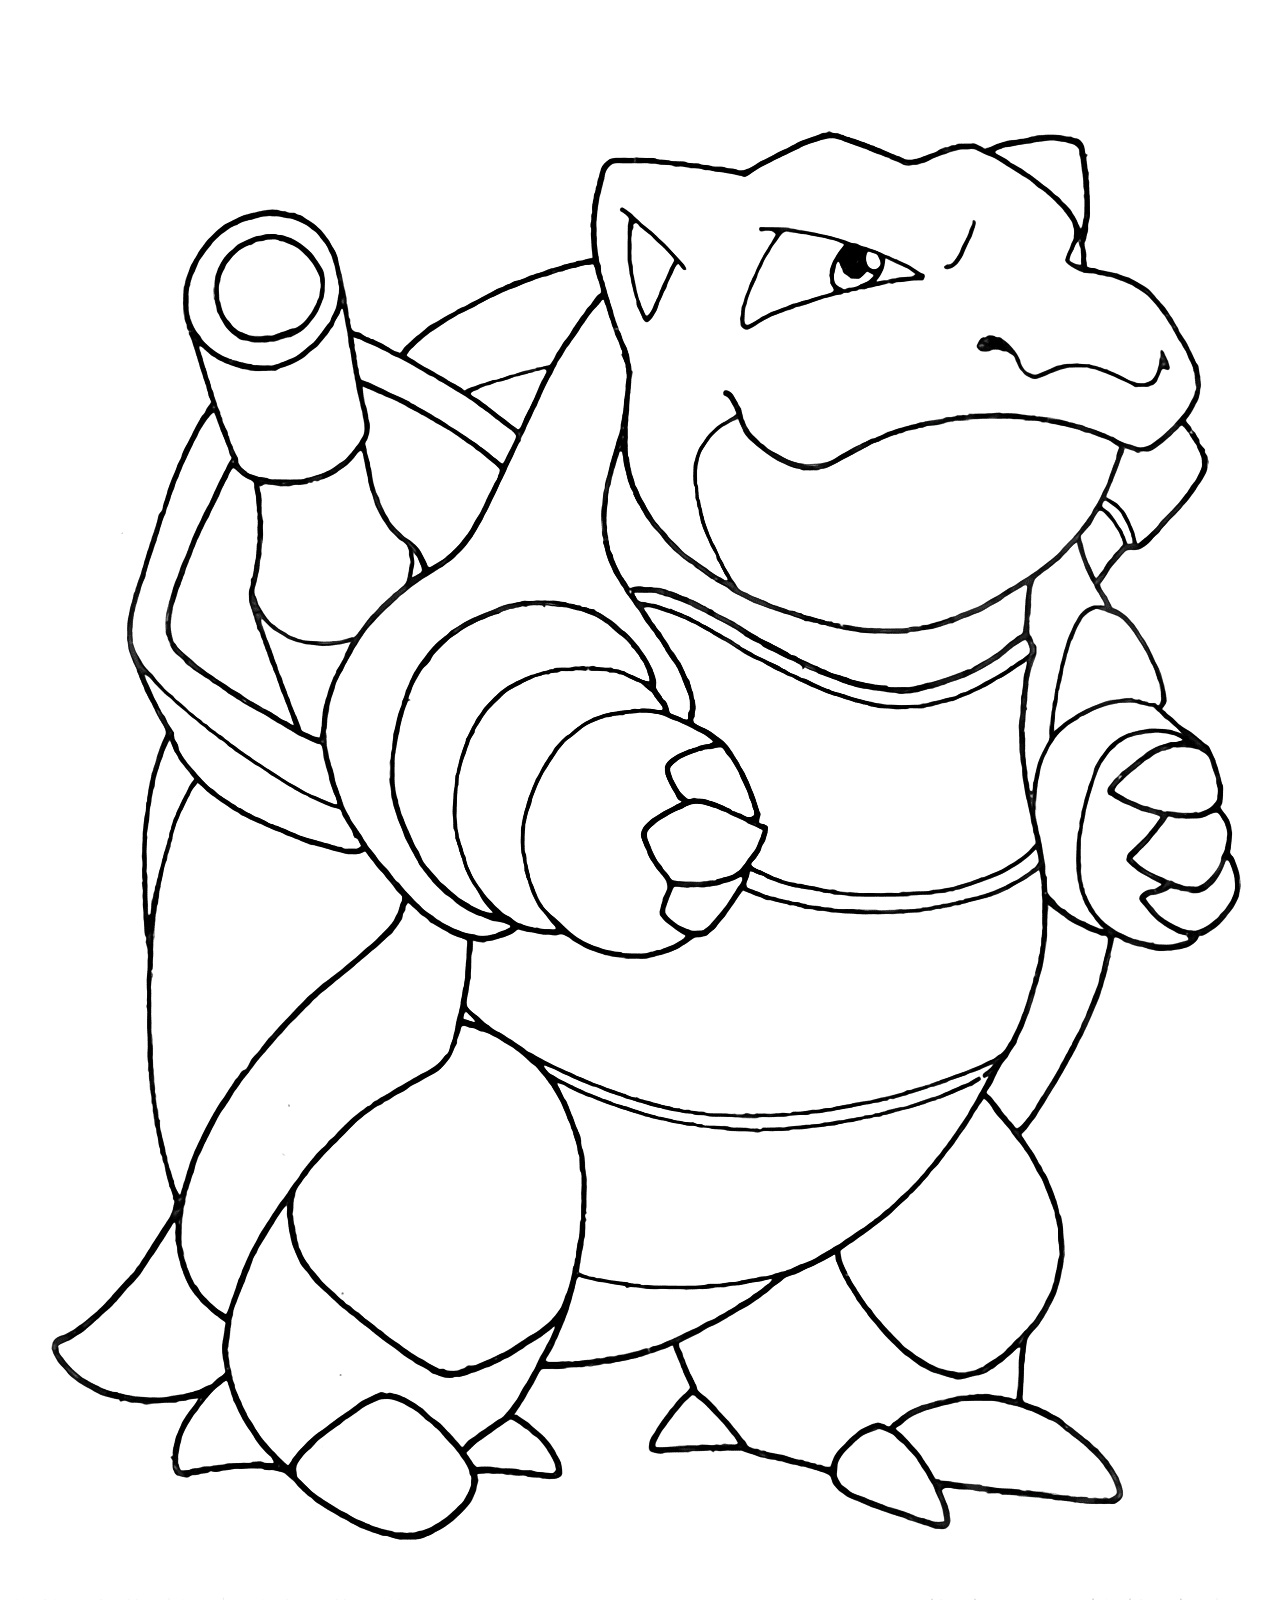 Download Free Blastoise Coloring Pages Collection - Free Pokemon Coloring Pages